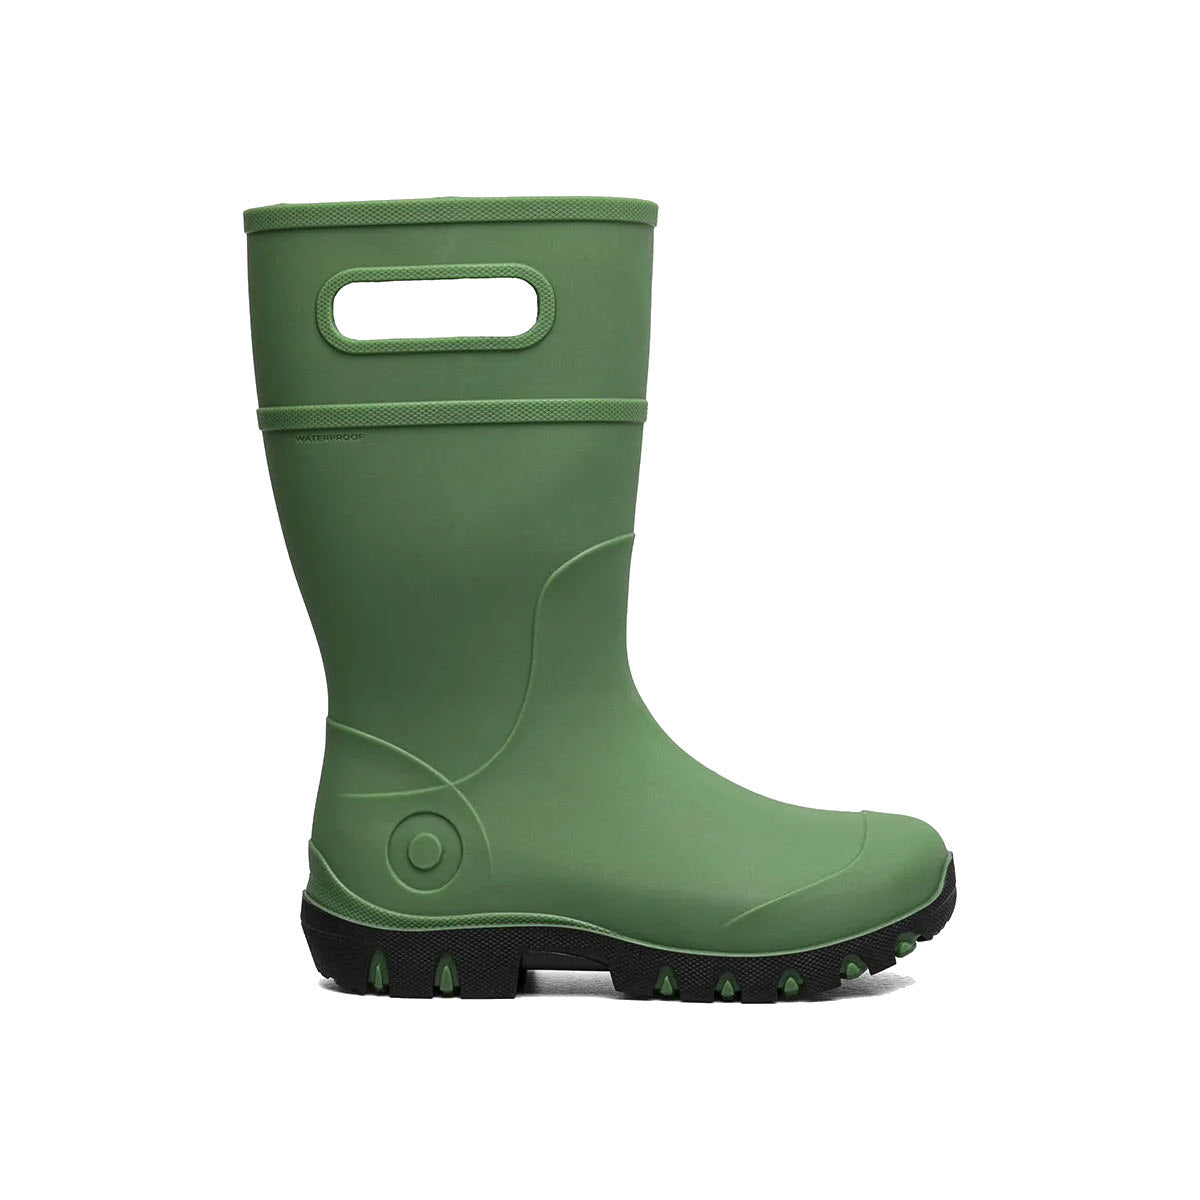 A green rubber boot with a handle on the top and a rugged sole, featuring space-age seamless construction, isolated on a white background - Bogs Essential Rain Tall Grass - Kids.